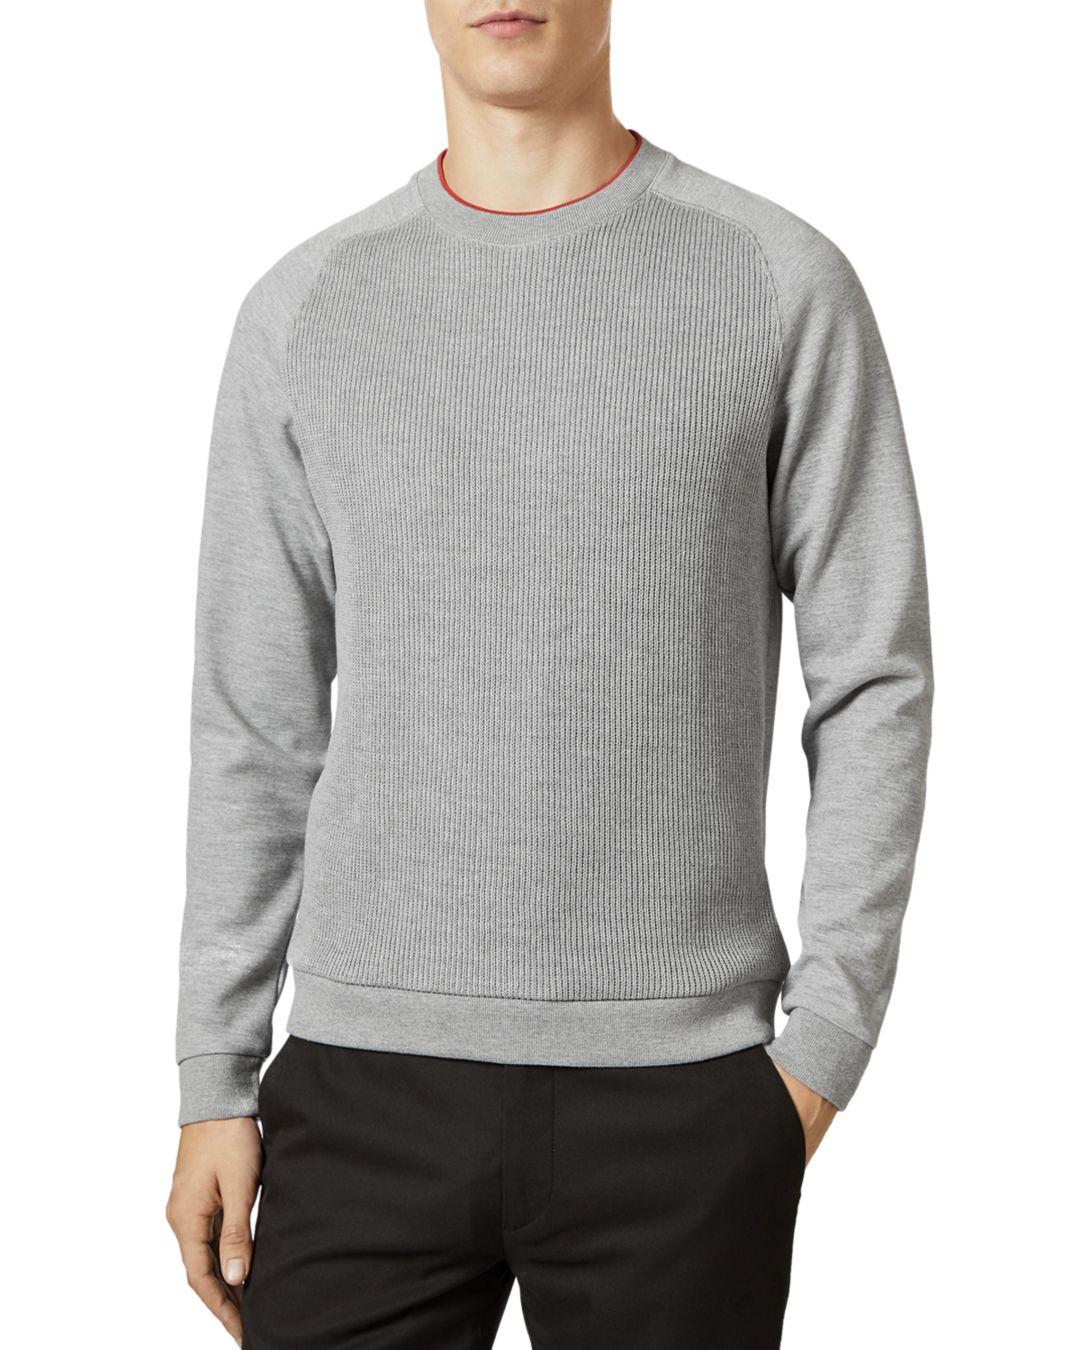 Ted Baker Pied Sweat Top in Black